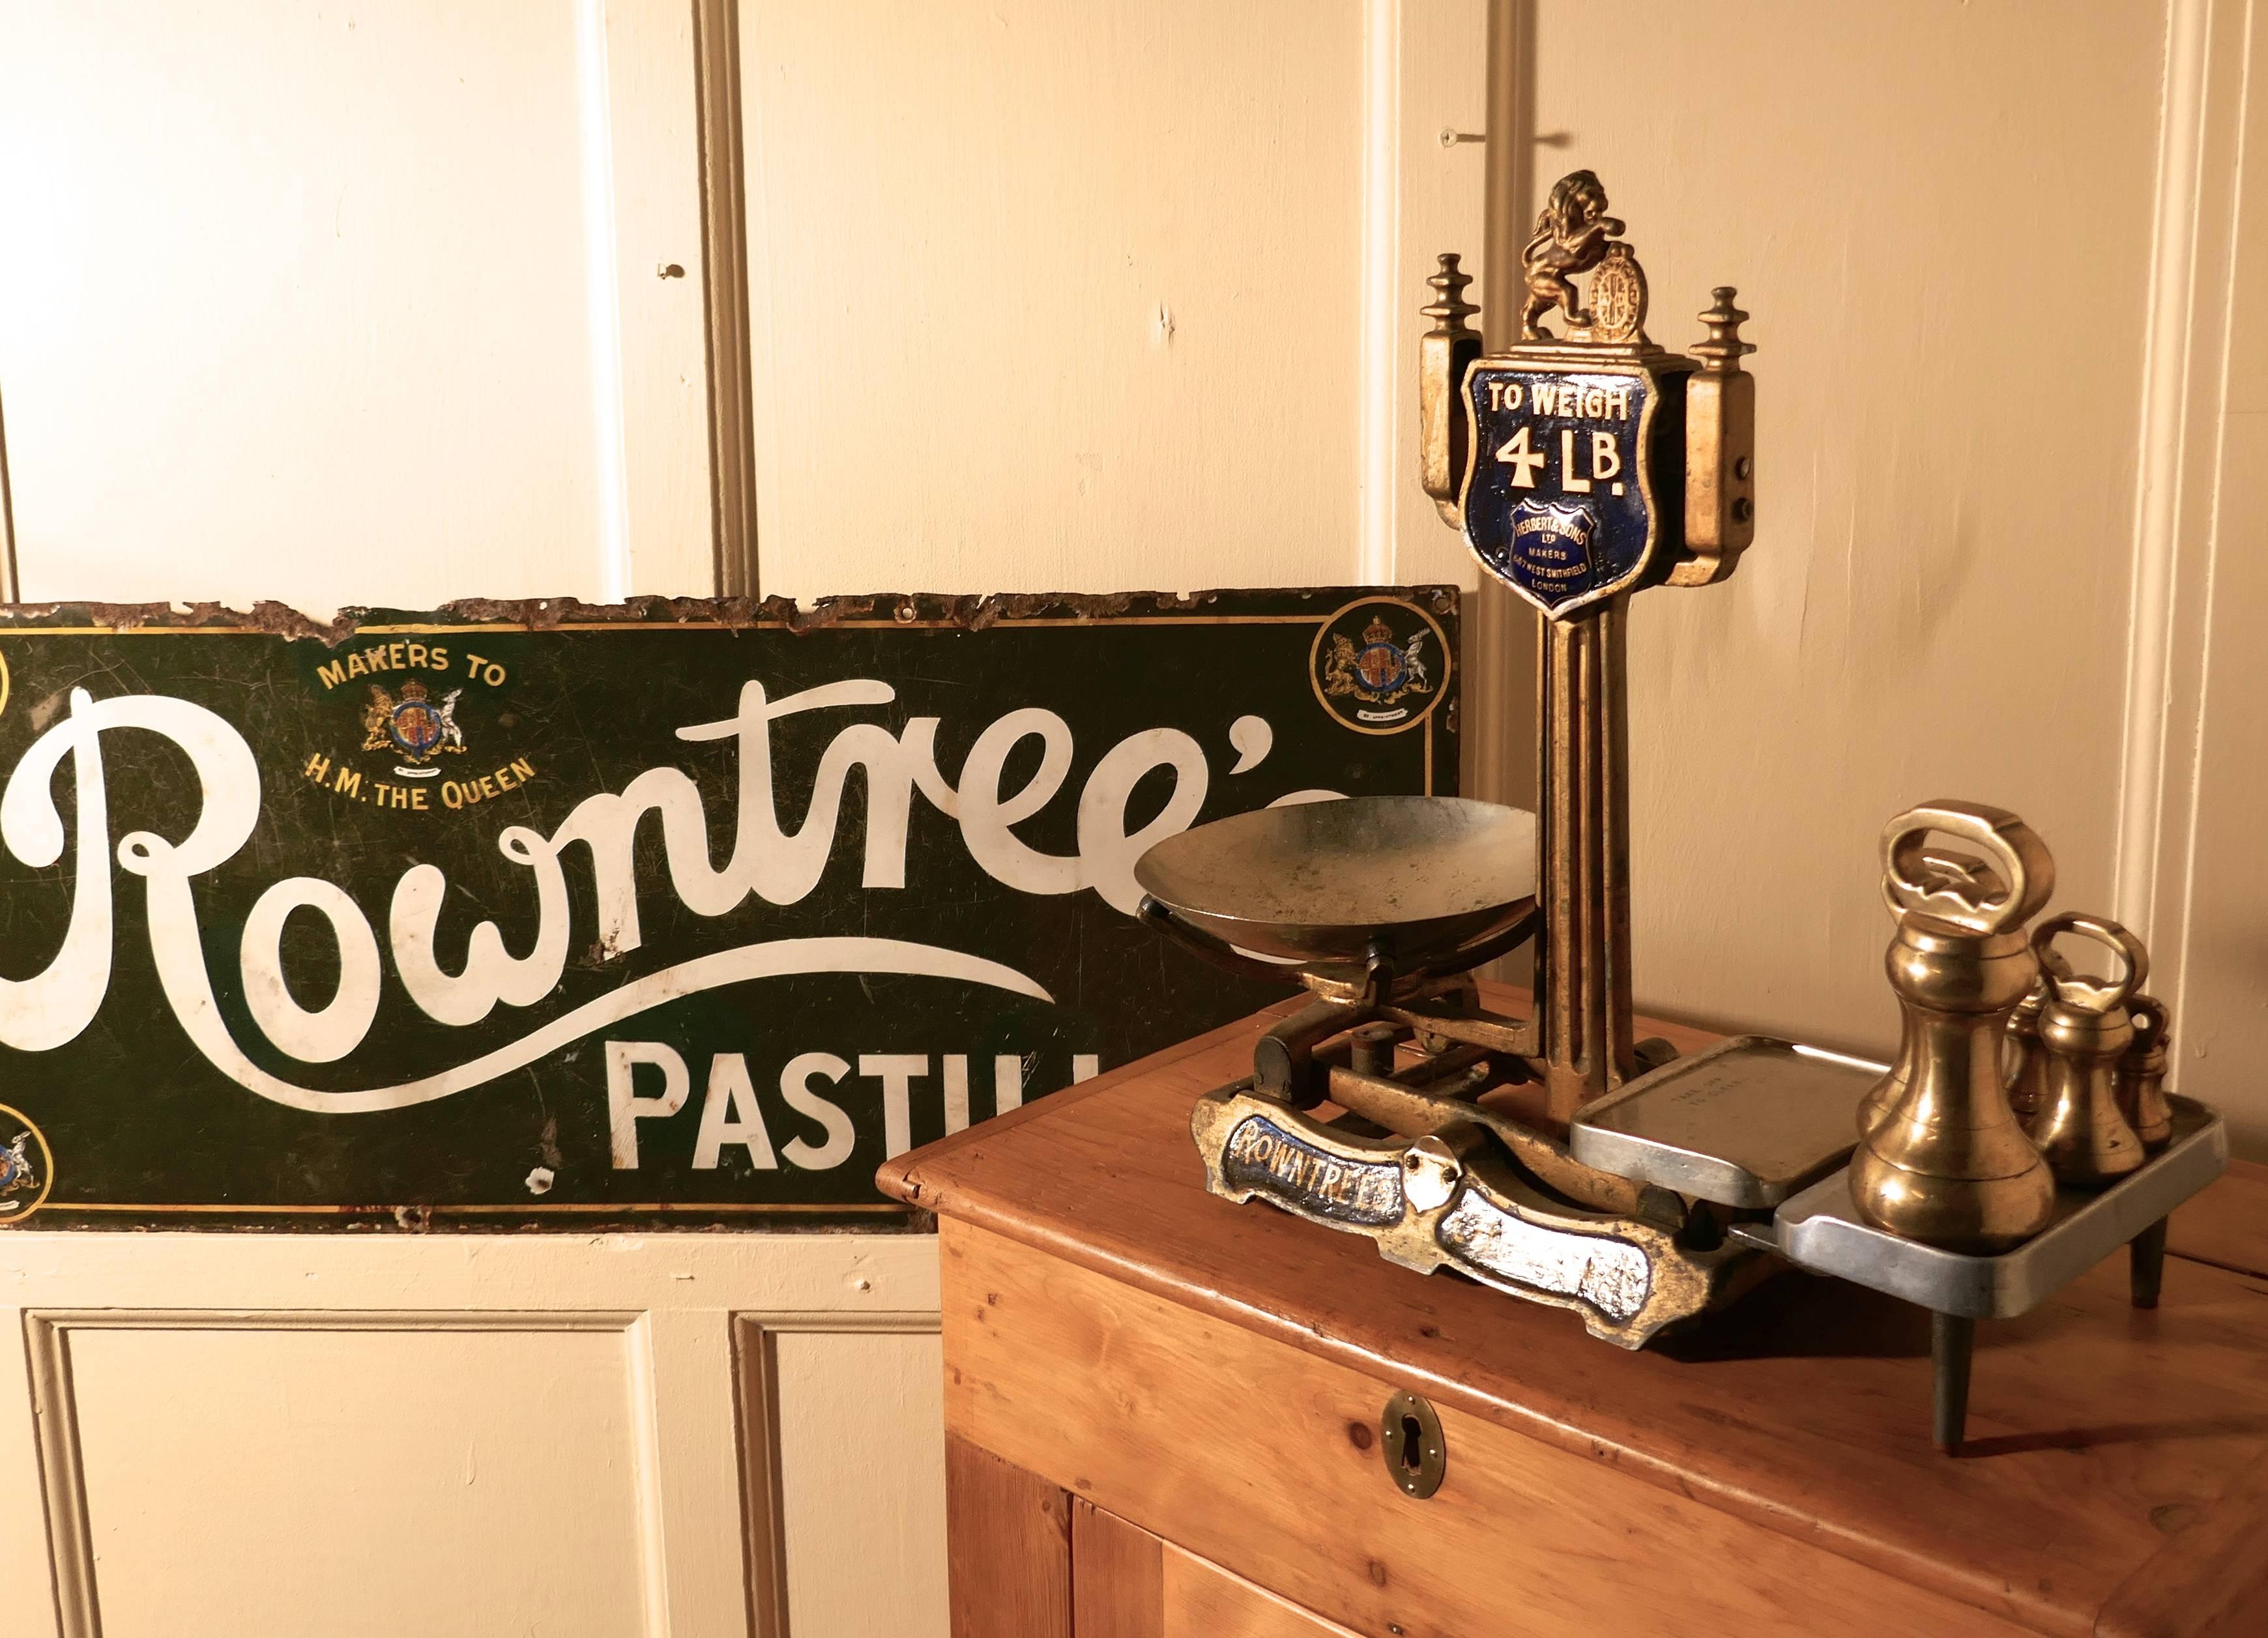 A 19th century set of Rowntree’s sweetshop scales with brass bell weights

This a very rare find, the scales are cast iron with steel pans, the scales have an advertising banner along the bottom of the scale and at the top there is an enamel badge